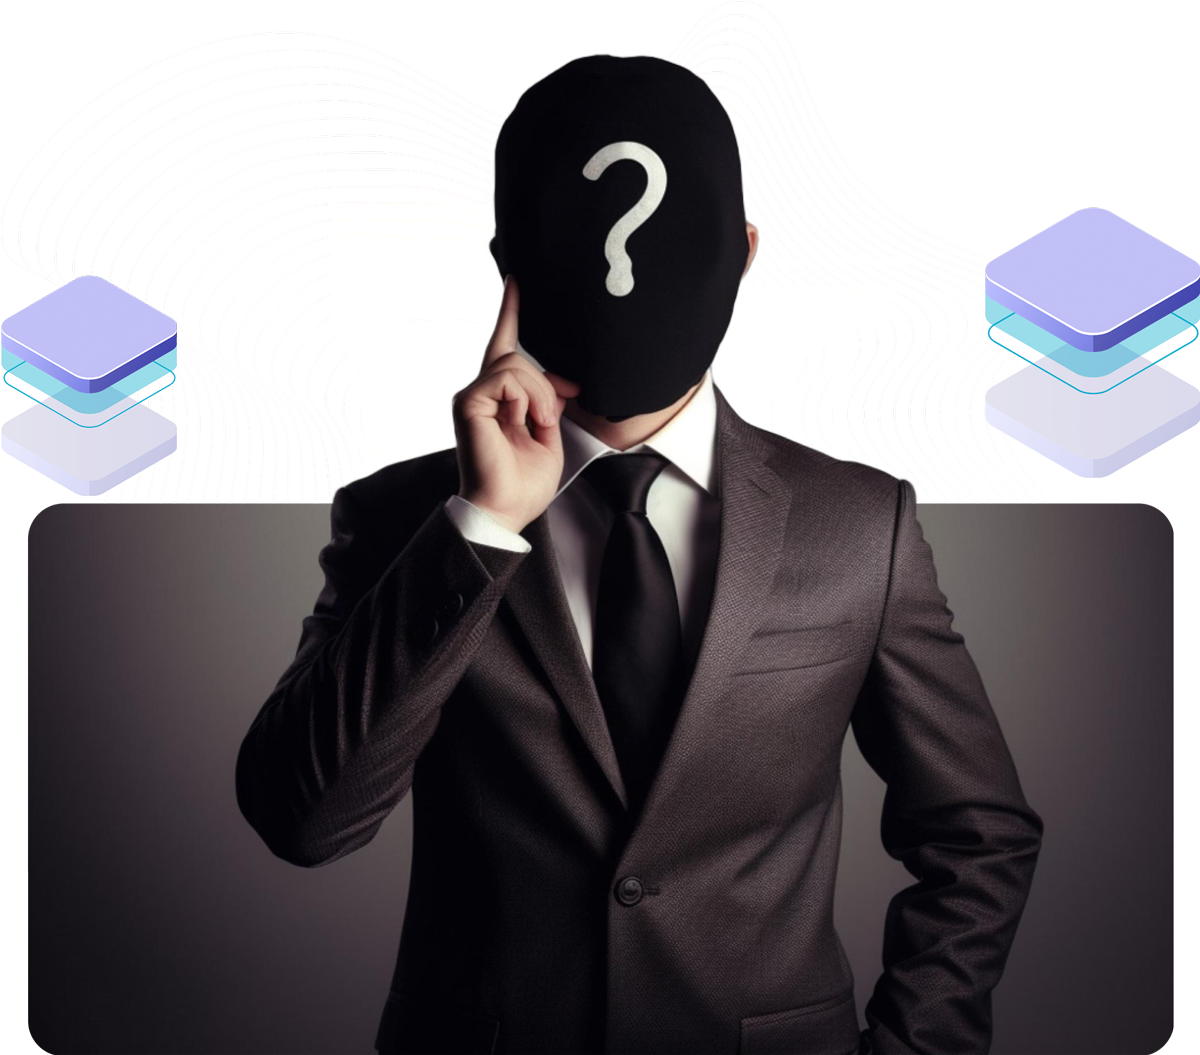 A man in a suit has a question mark on his hat